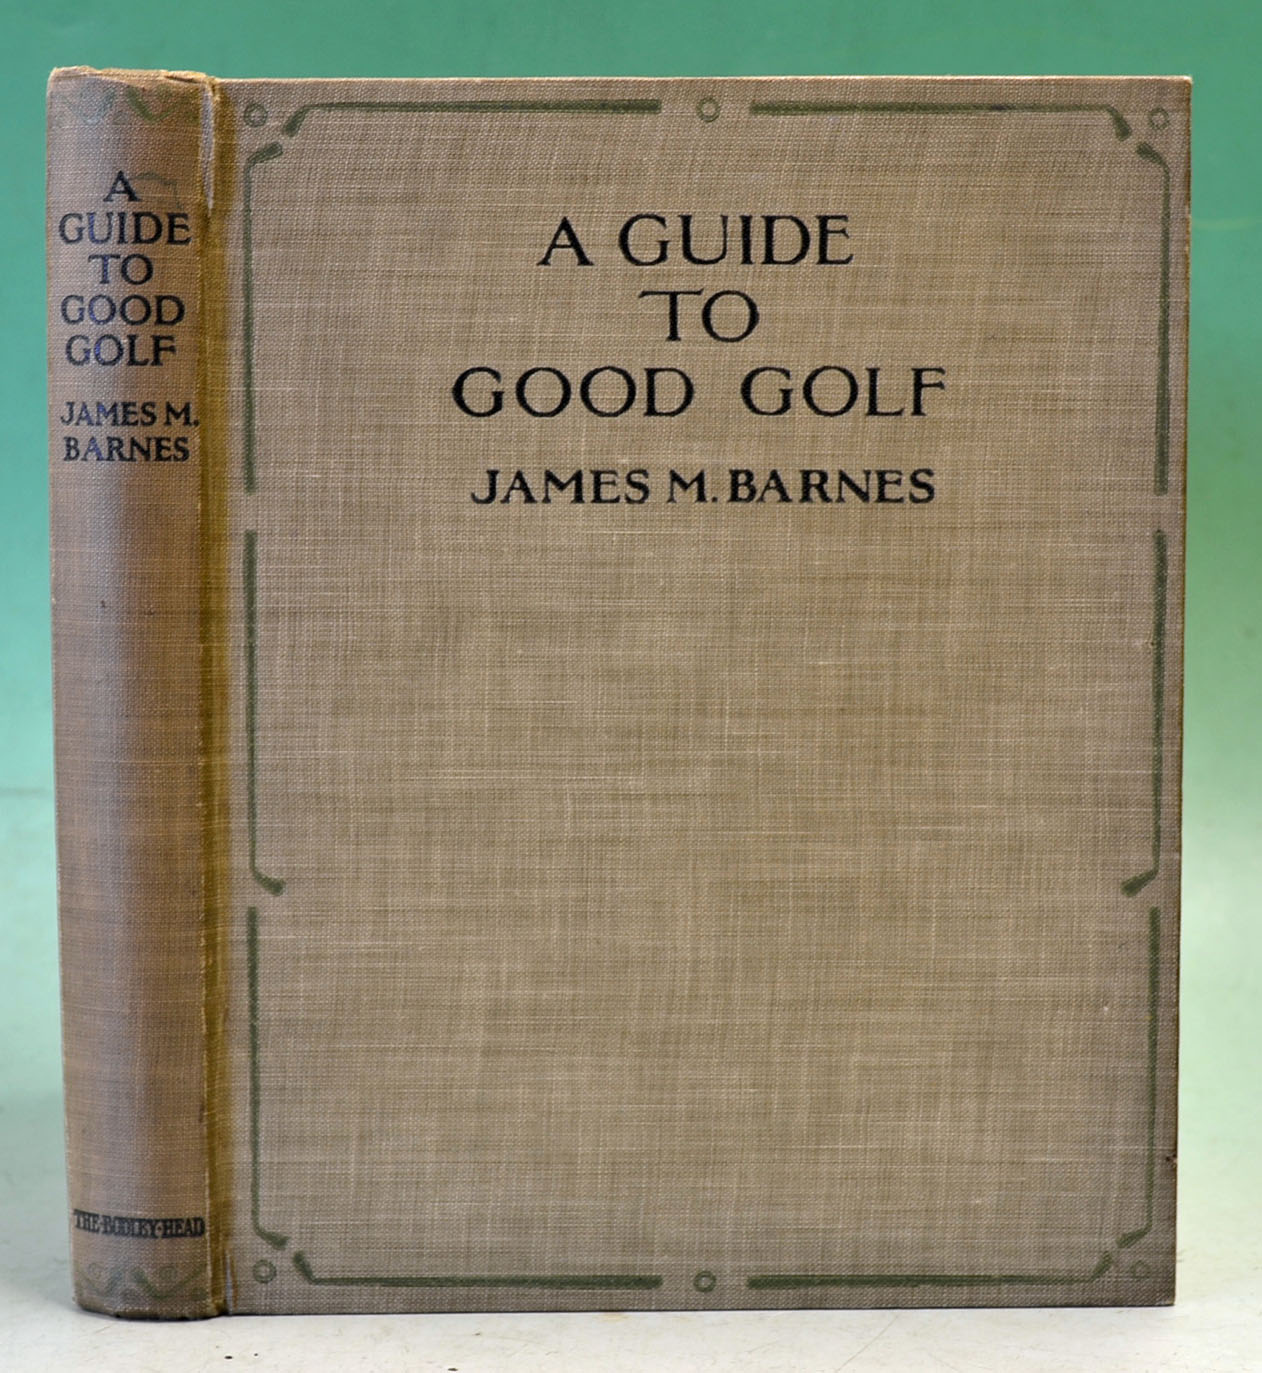 Barnes, James M - “A Guide to Good Golf" - 1st ed 1925 in the original decorative green cloth boards